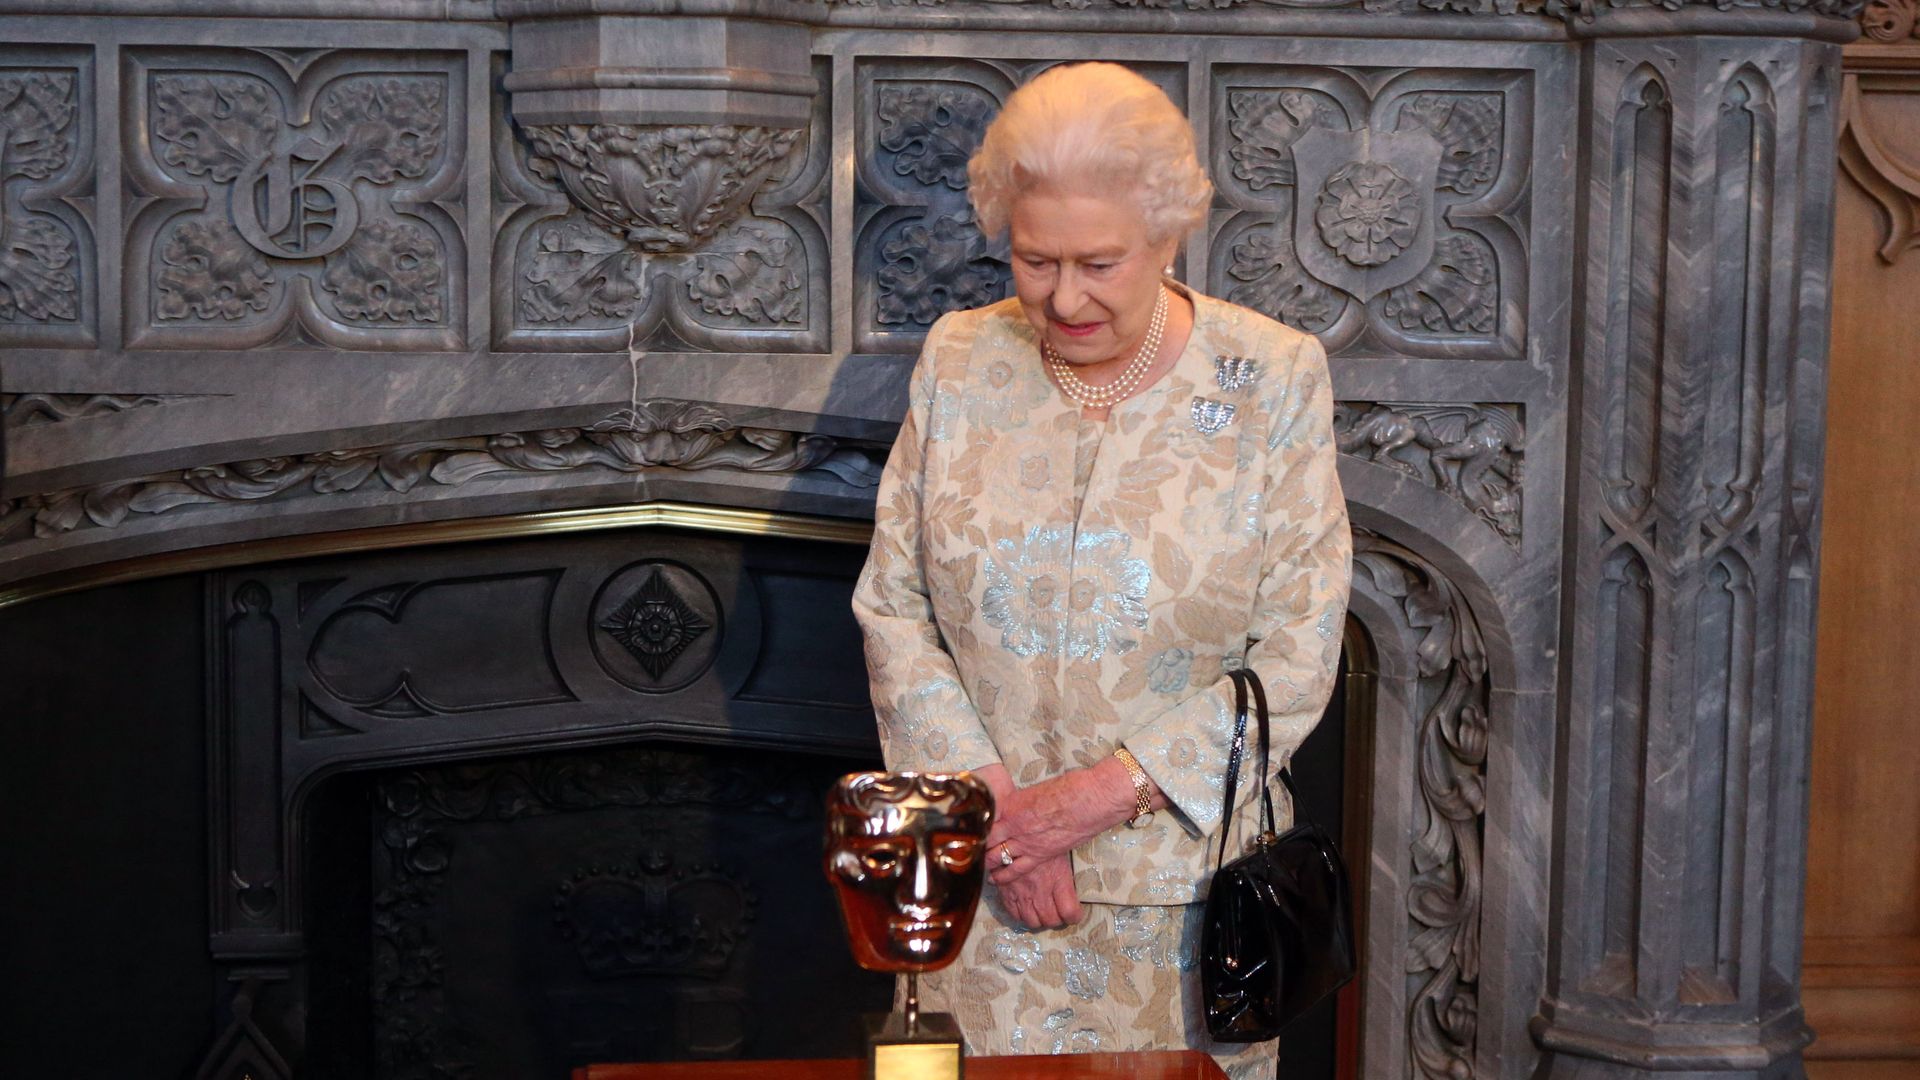 Queen Elizabeth II looks at the BAFTA that she received in recognition for a lifetime's support of British Film and Television at a reception for the British Film Industry at Windsor Castle on April 4, 2013 